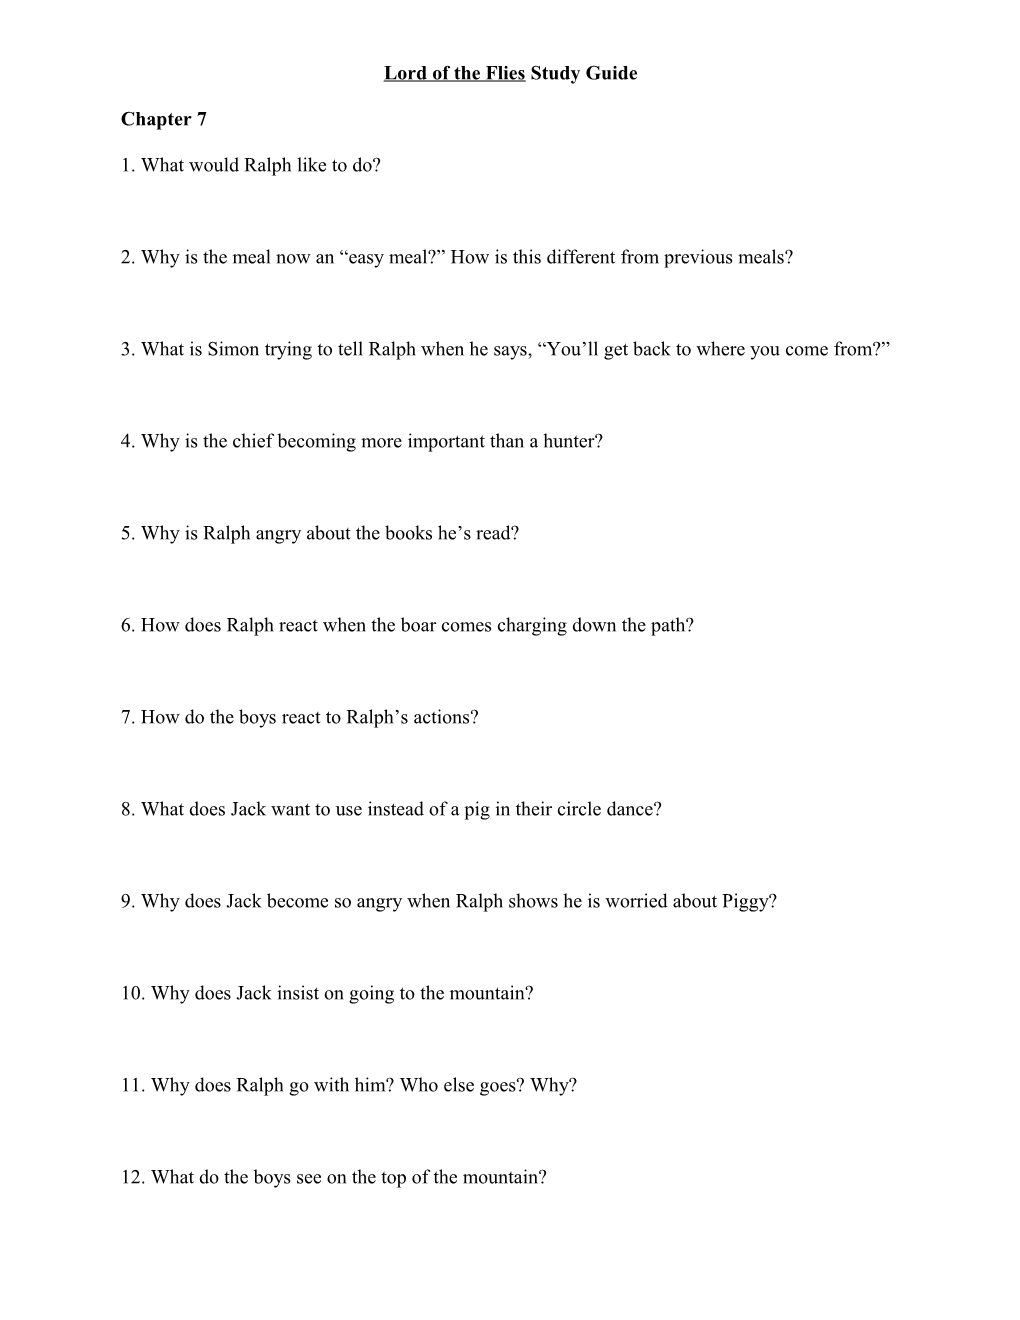 Lord of the Flies Study Guide s1